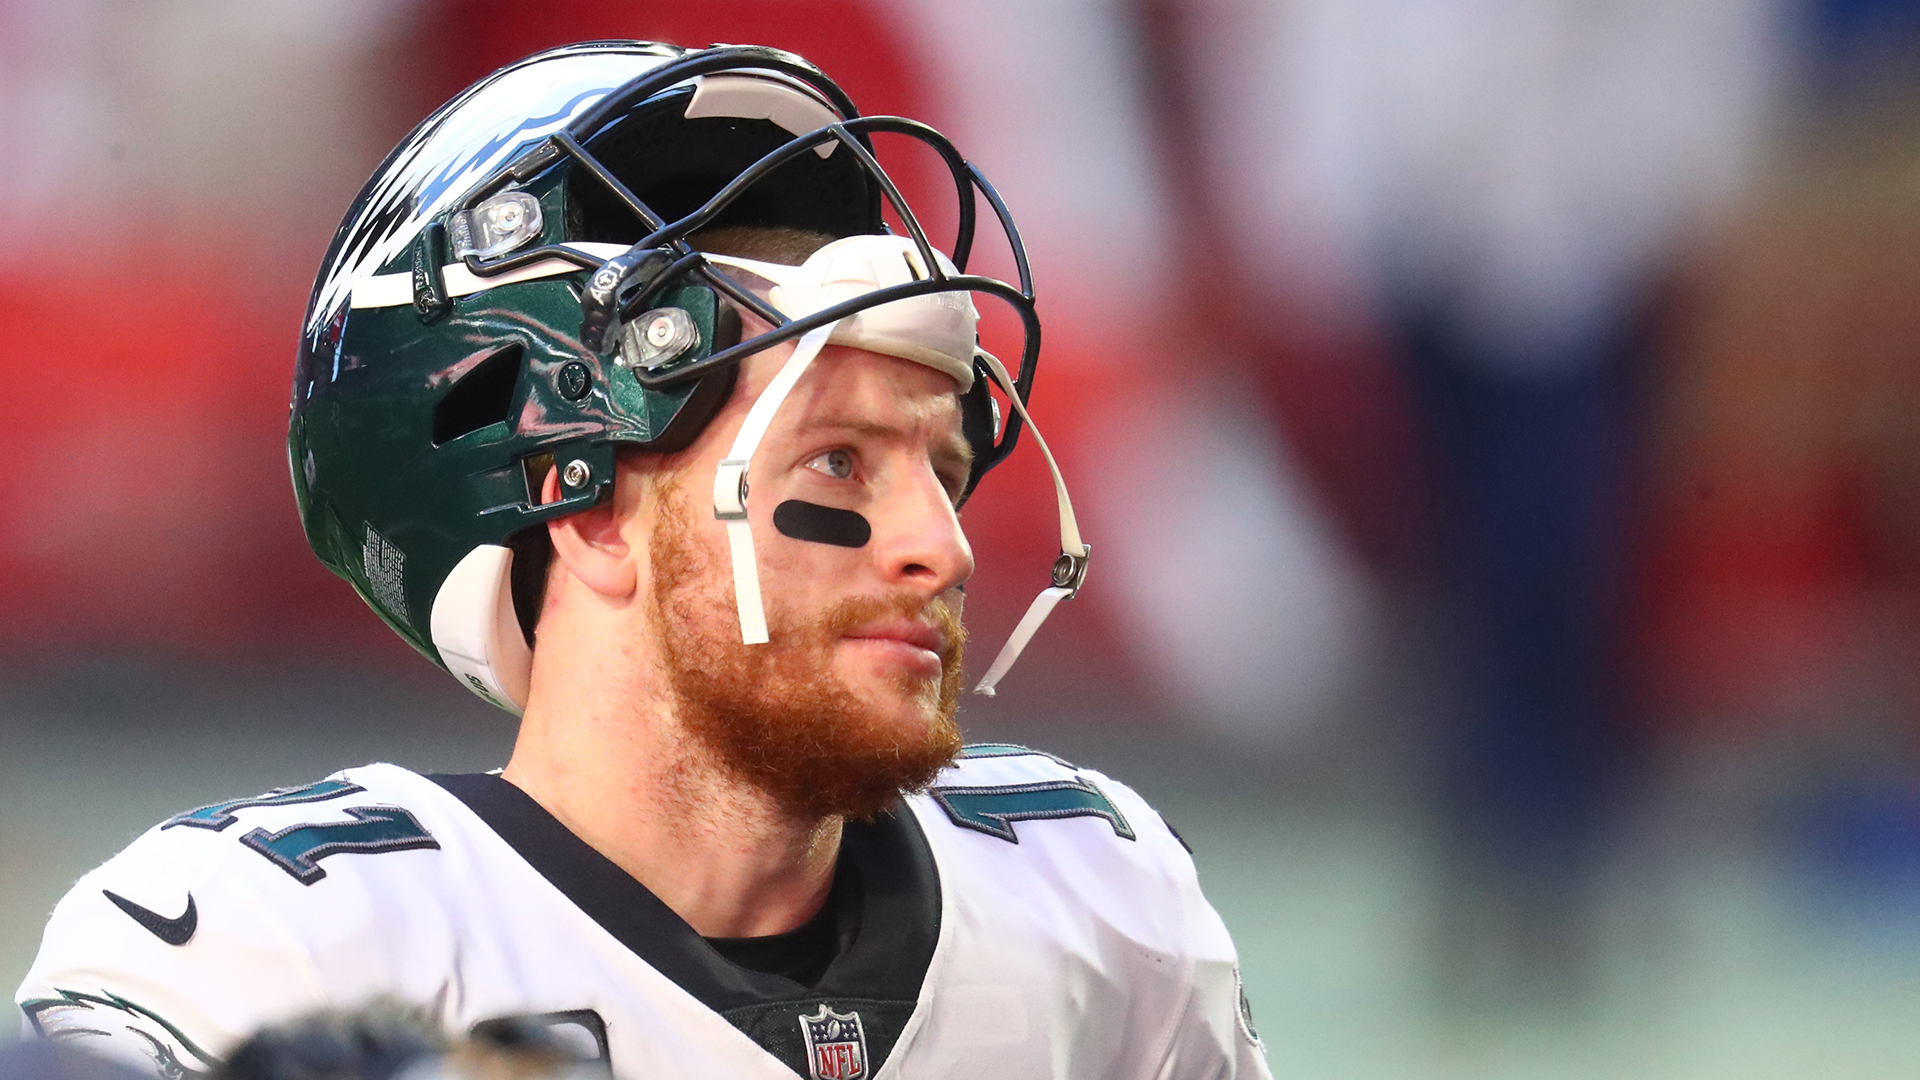 NFL Rumors: Insiders Apparently Can’t Agree on Carson Wentz’s Future as an Eagle